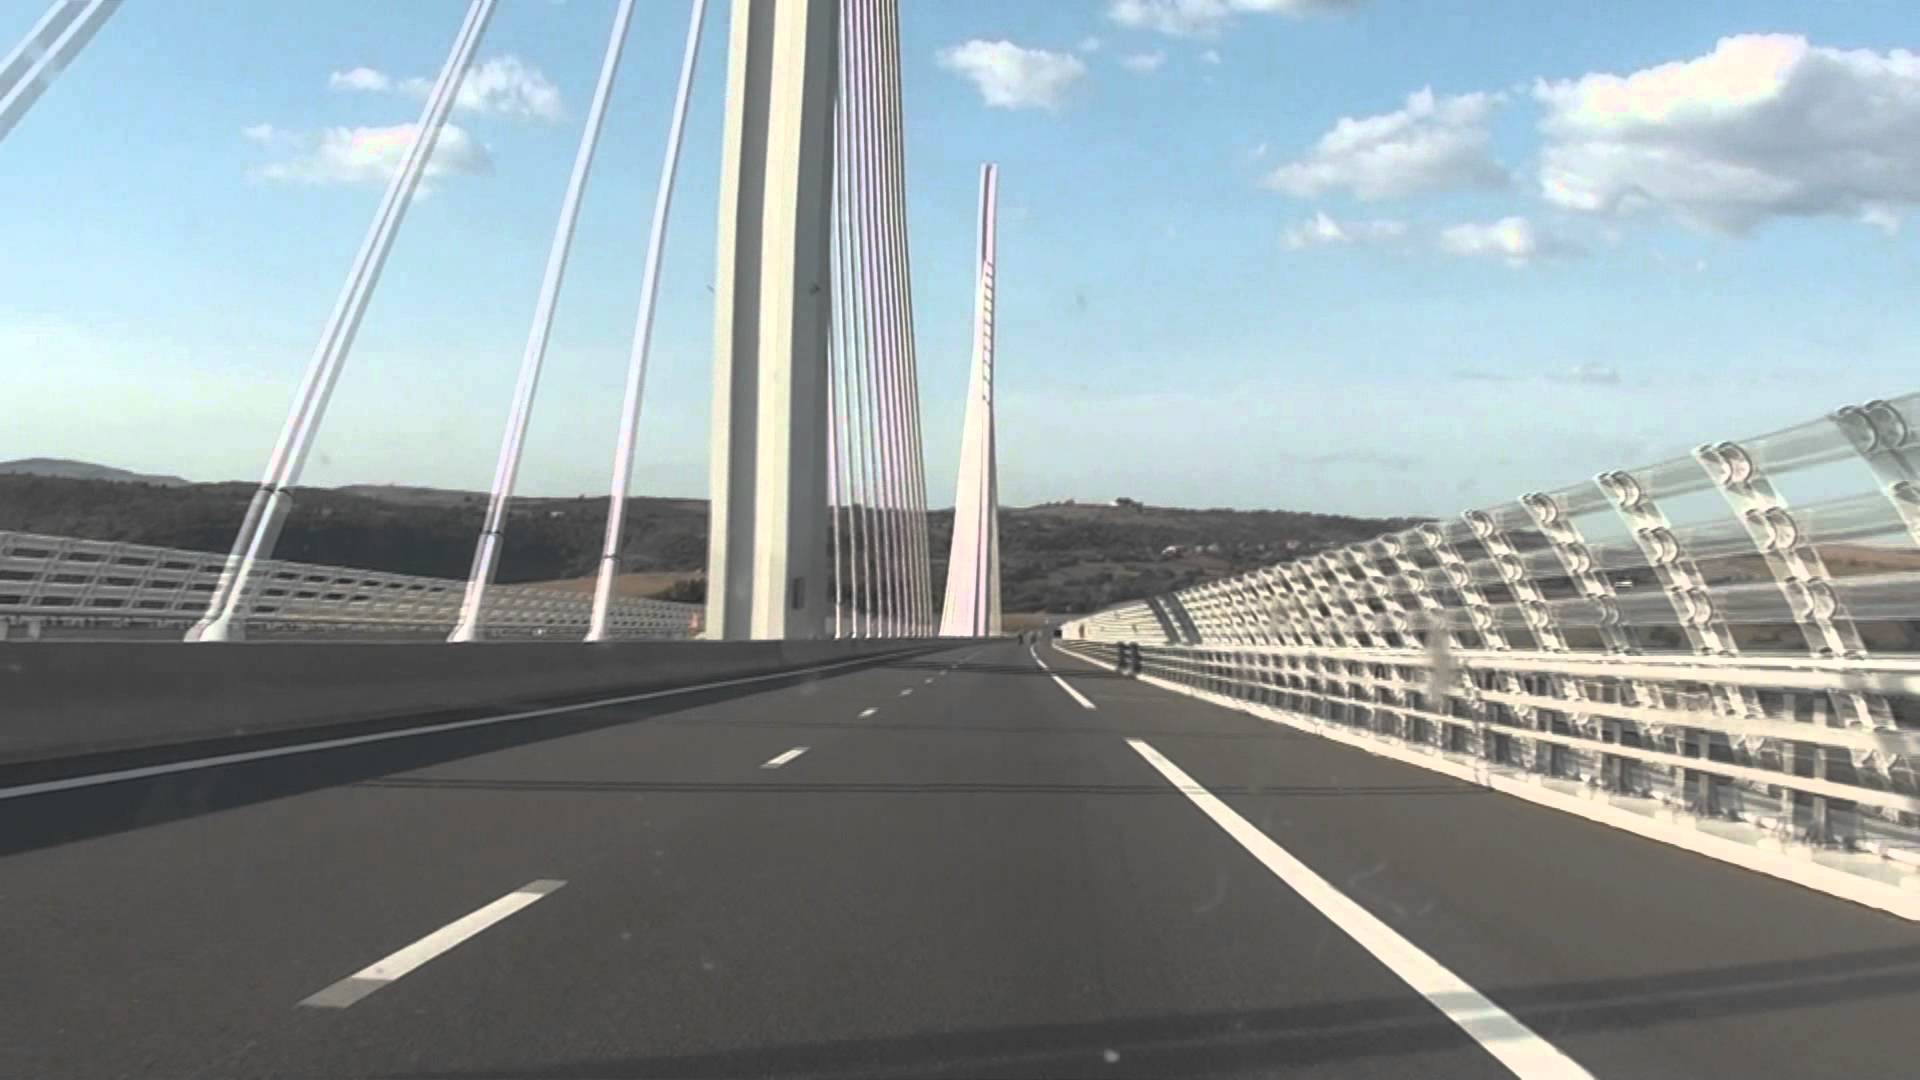 Riding over the Millau Viaduct 2011 - YouTube